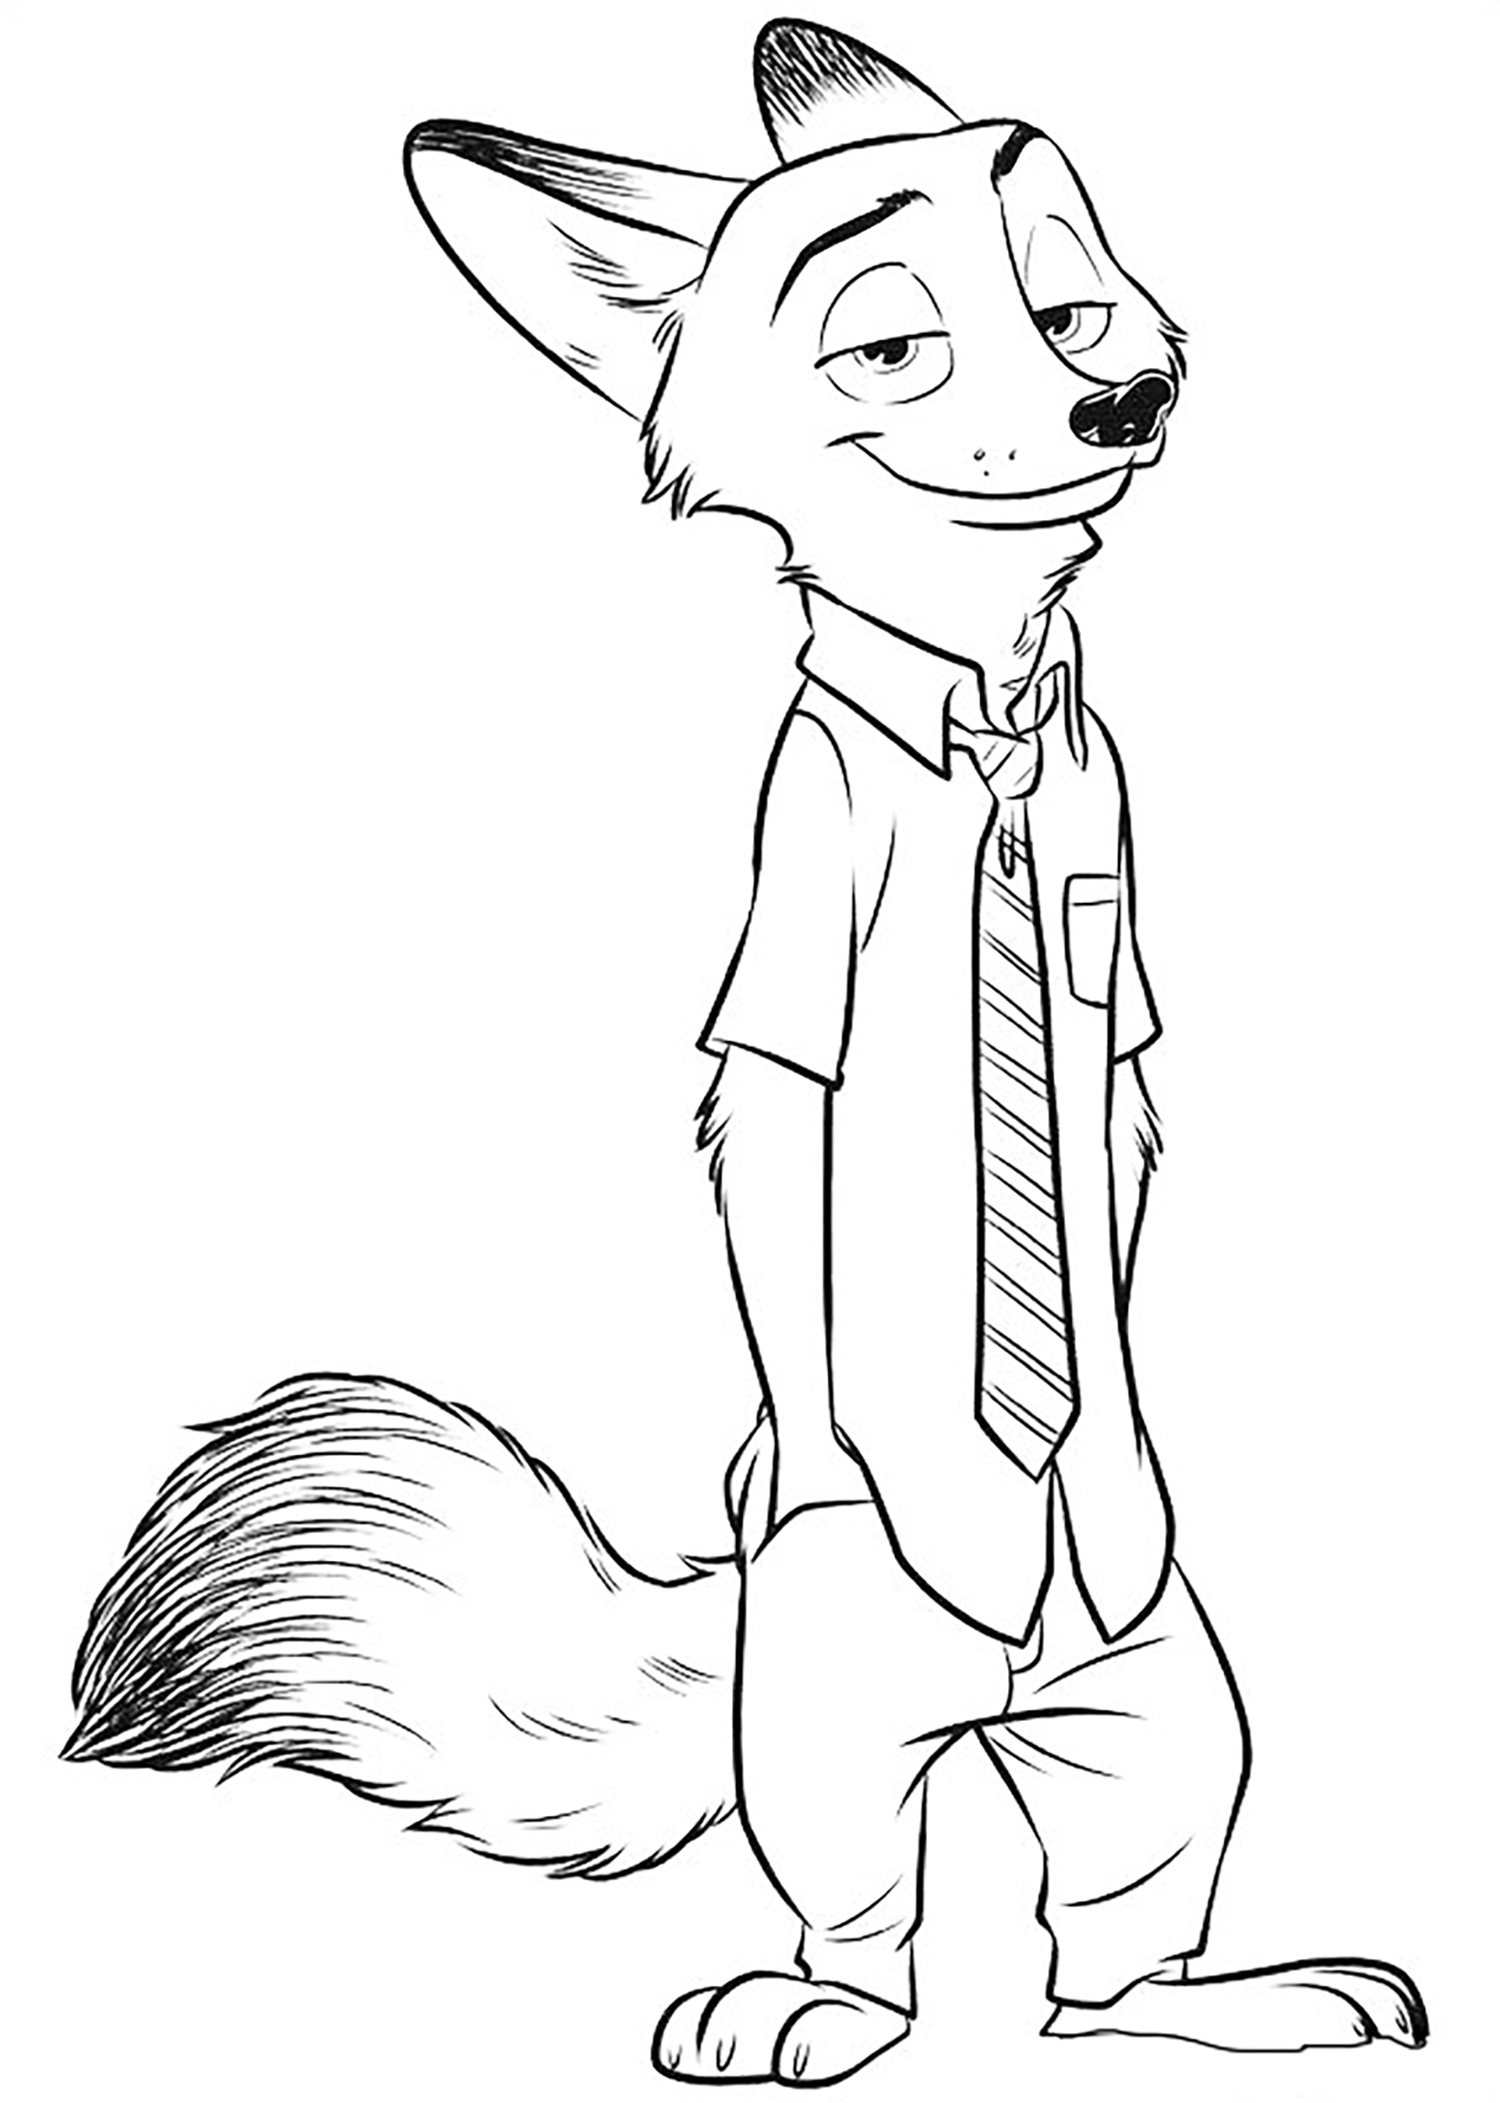 Beautiful Zootopia coloring page : Nick Wilde the fox